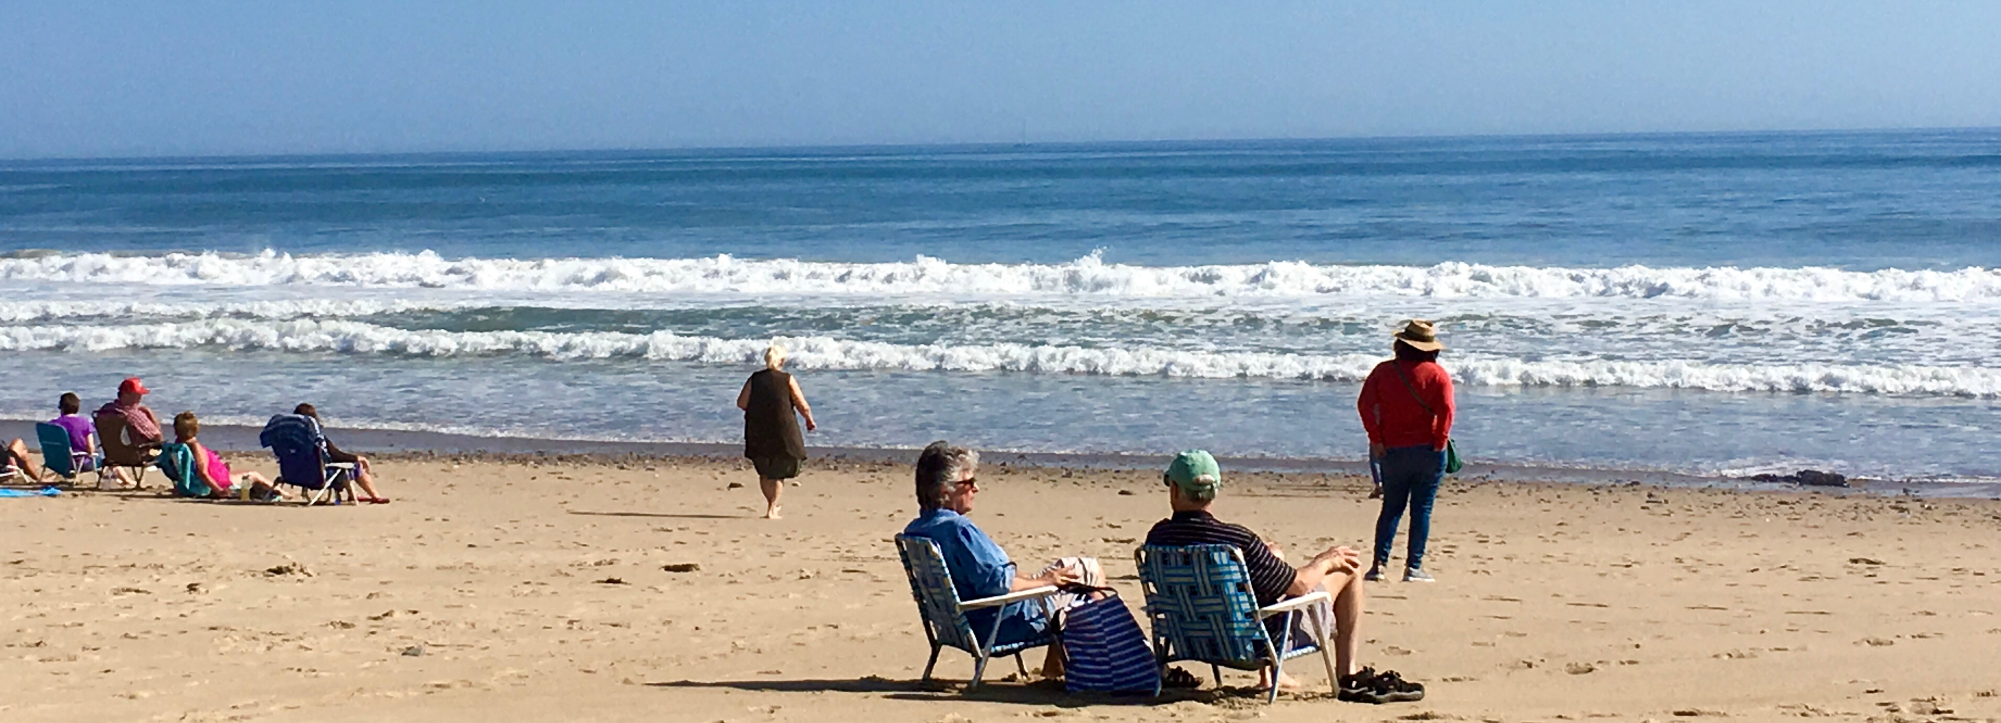 Several people stand and sit on chairs at the beach